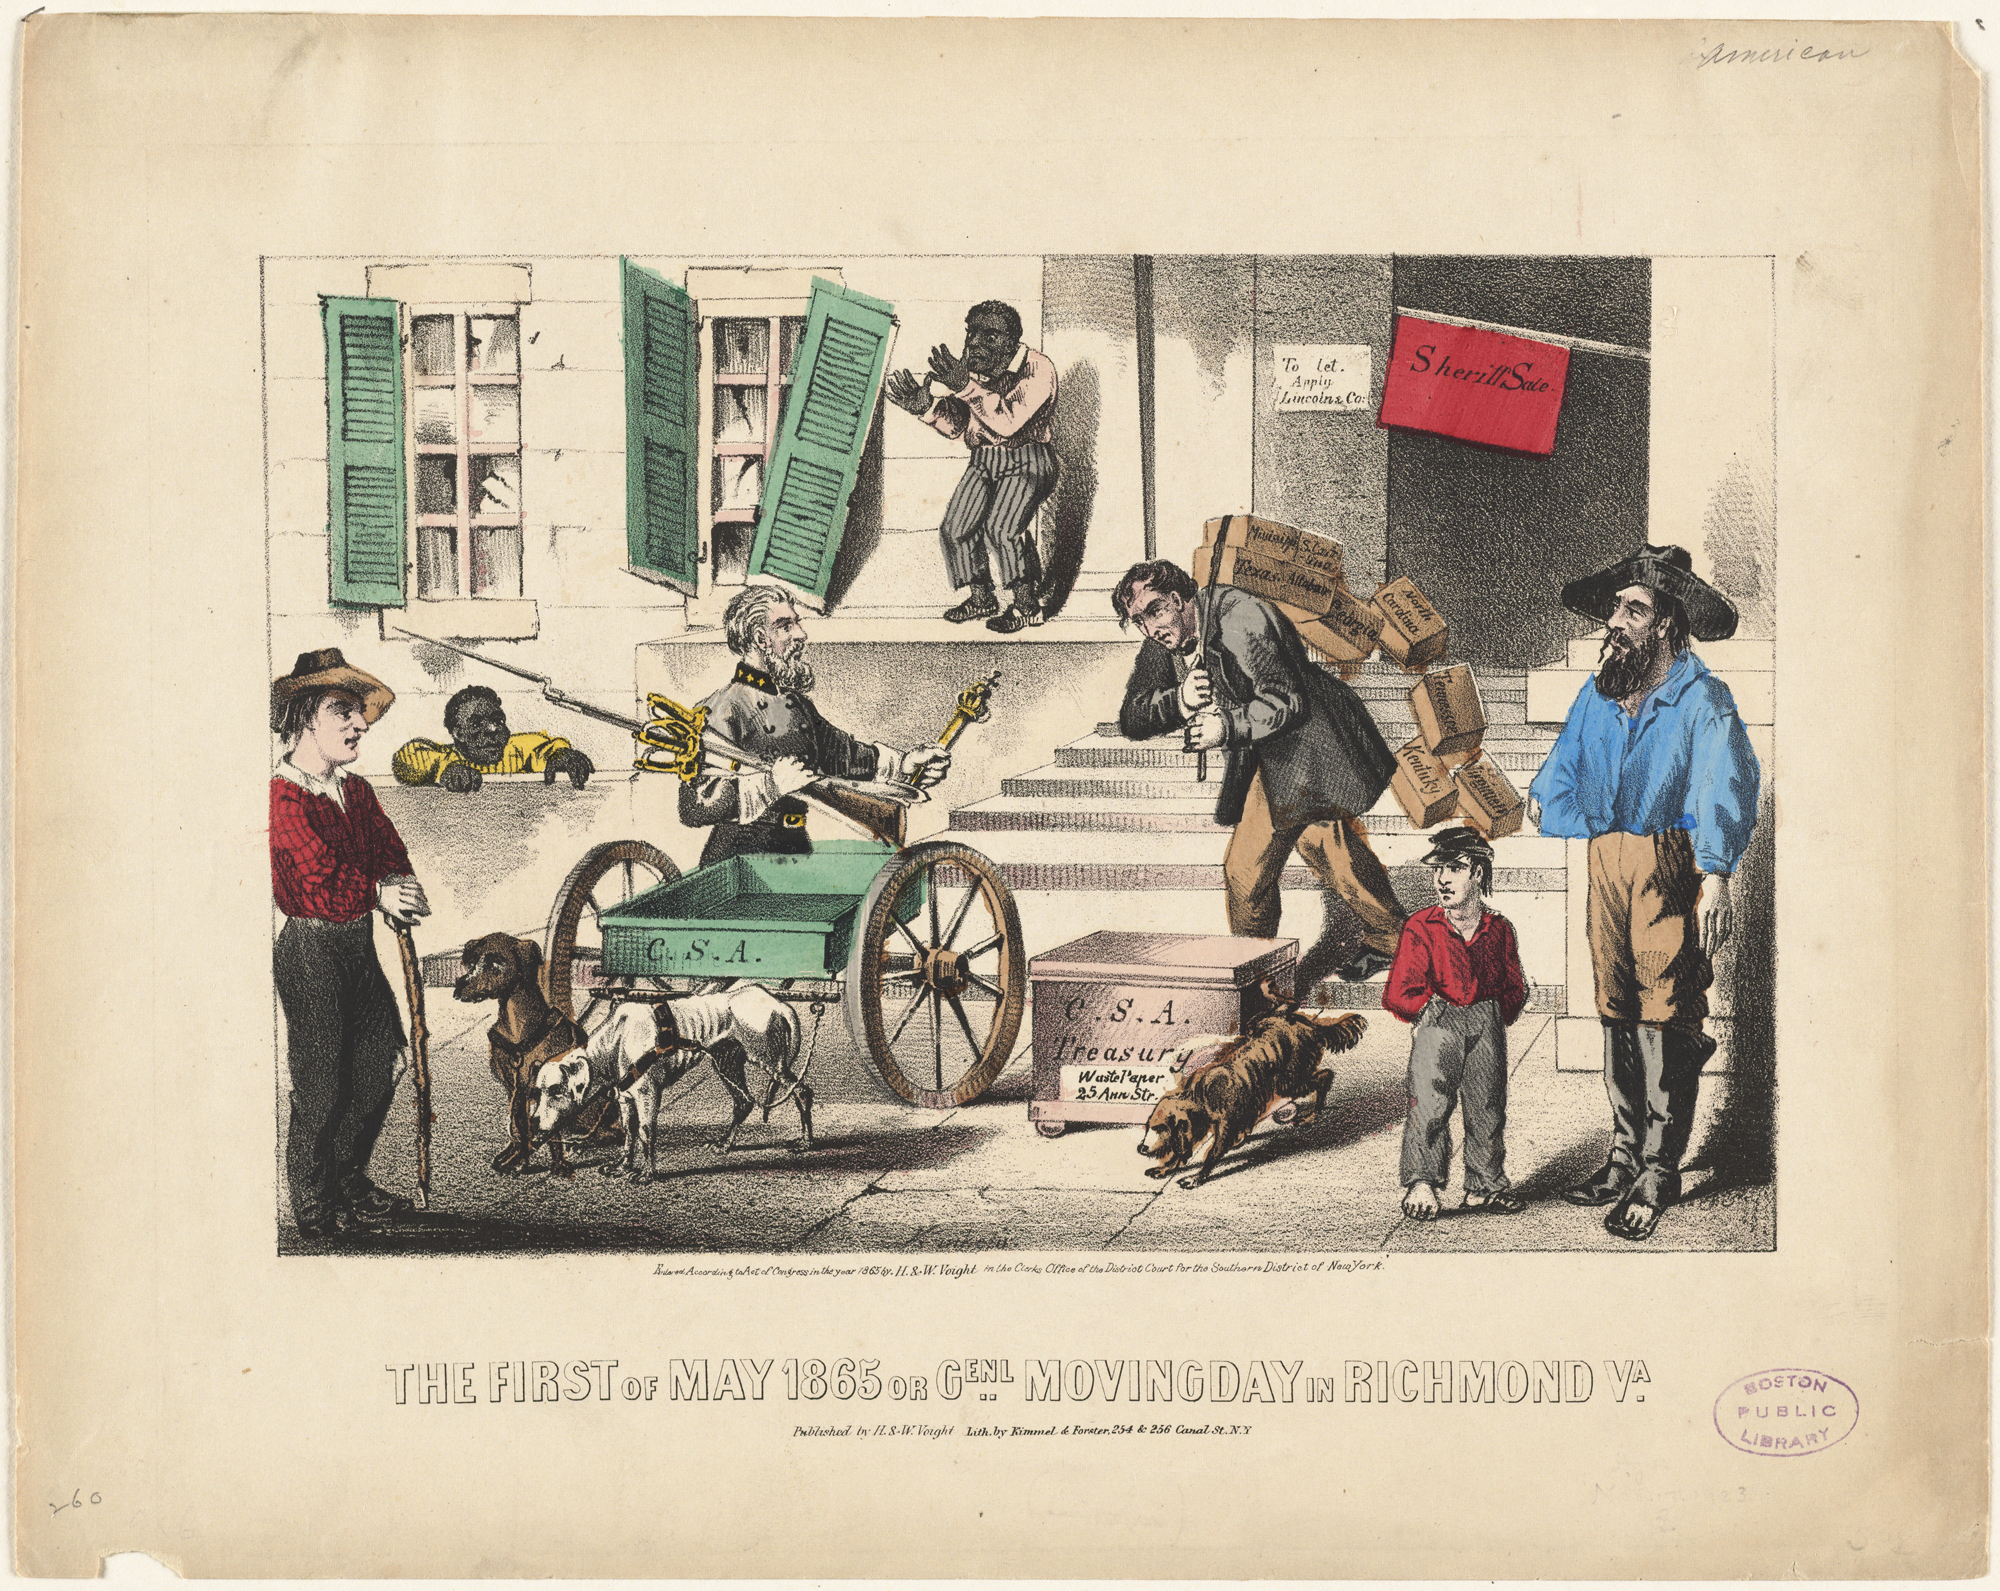 a color print shows an old man being watched by children